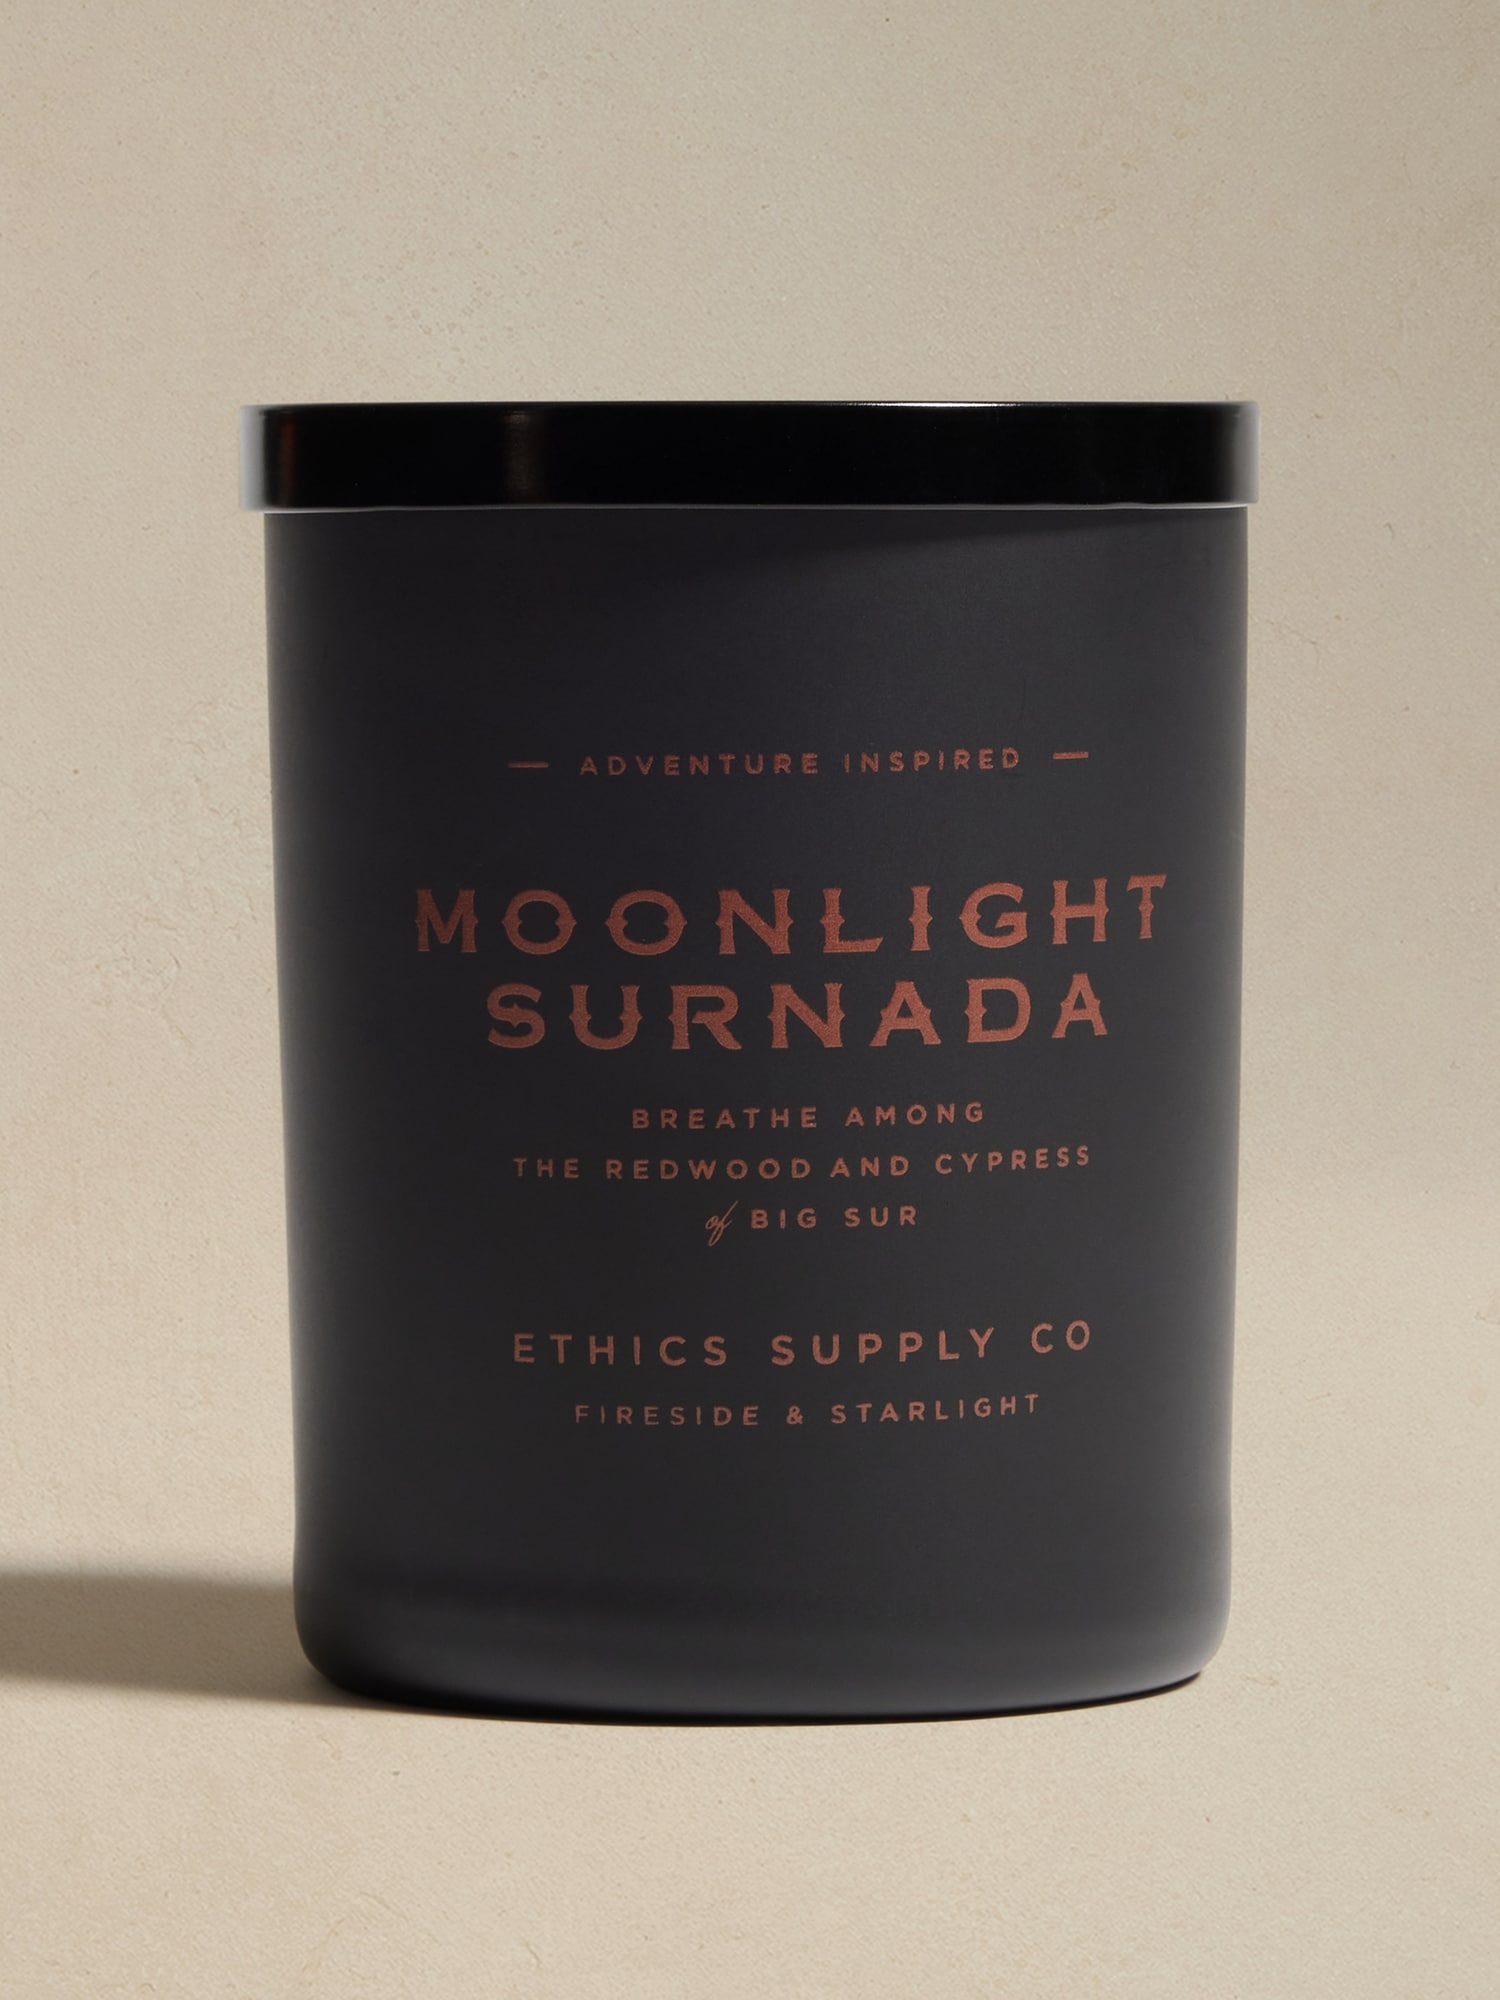 Ethics Supply Co &#124 Moonlight Surnada Candle